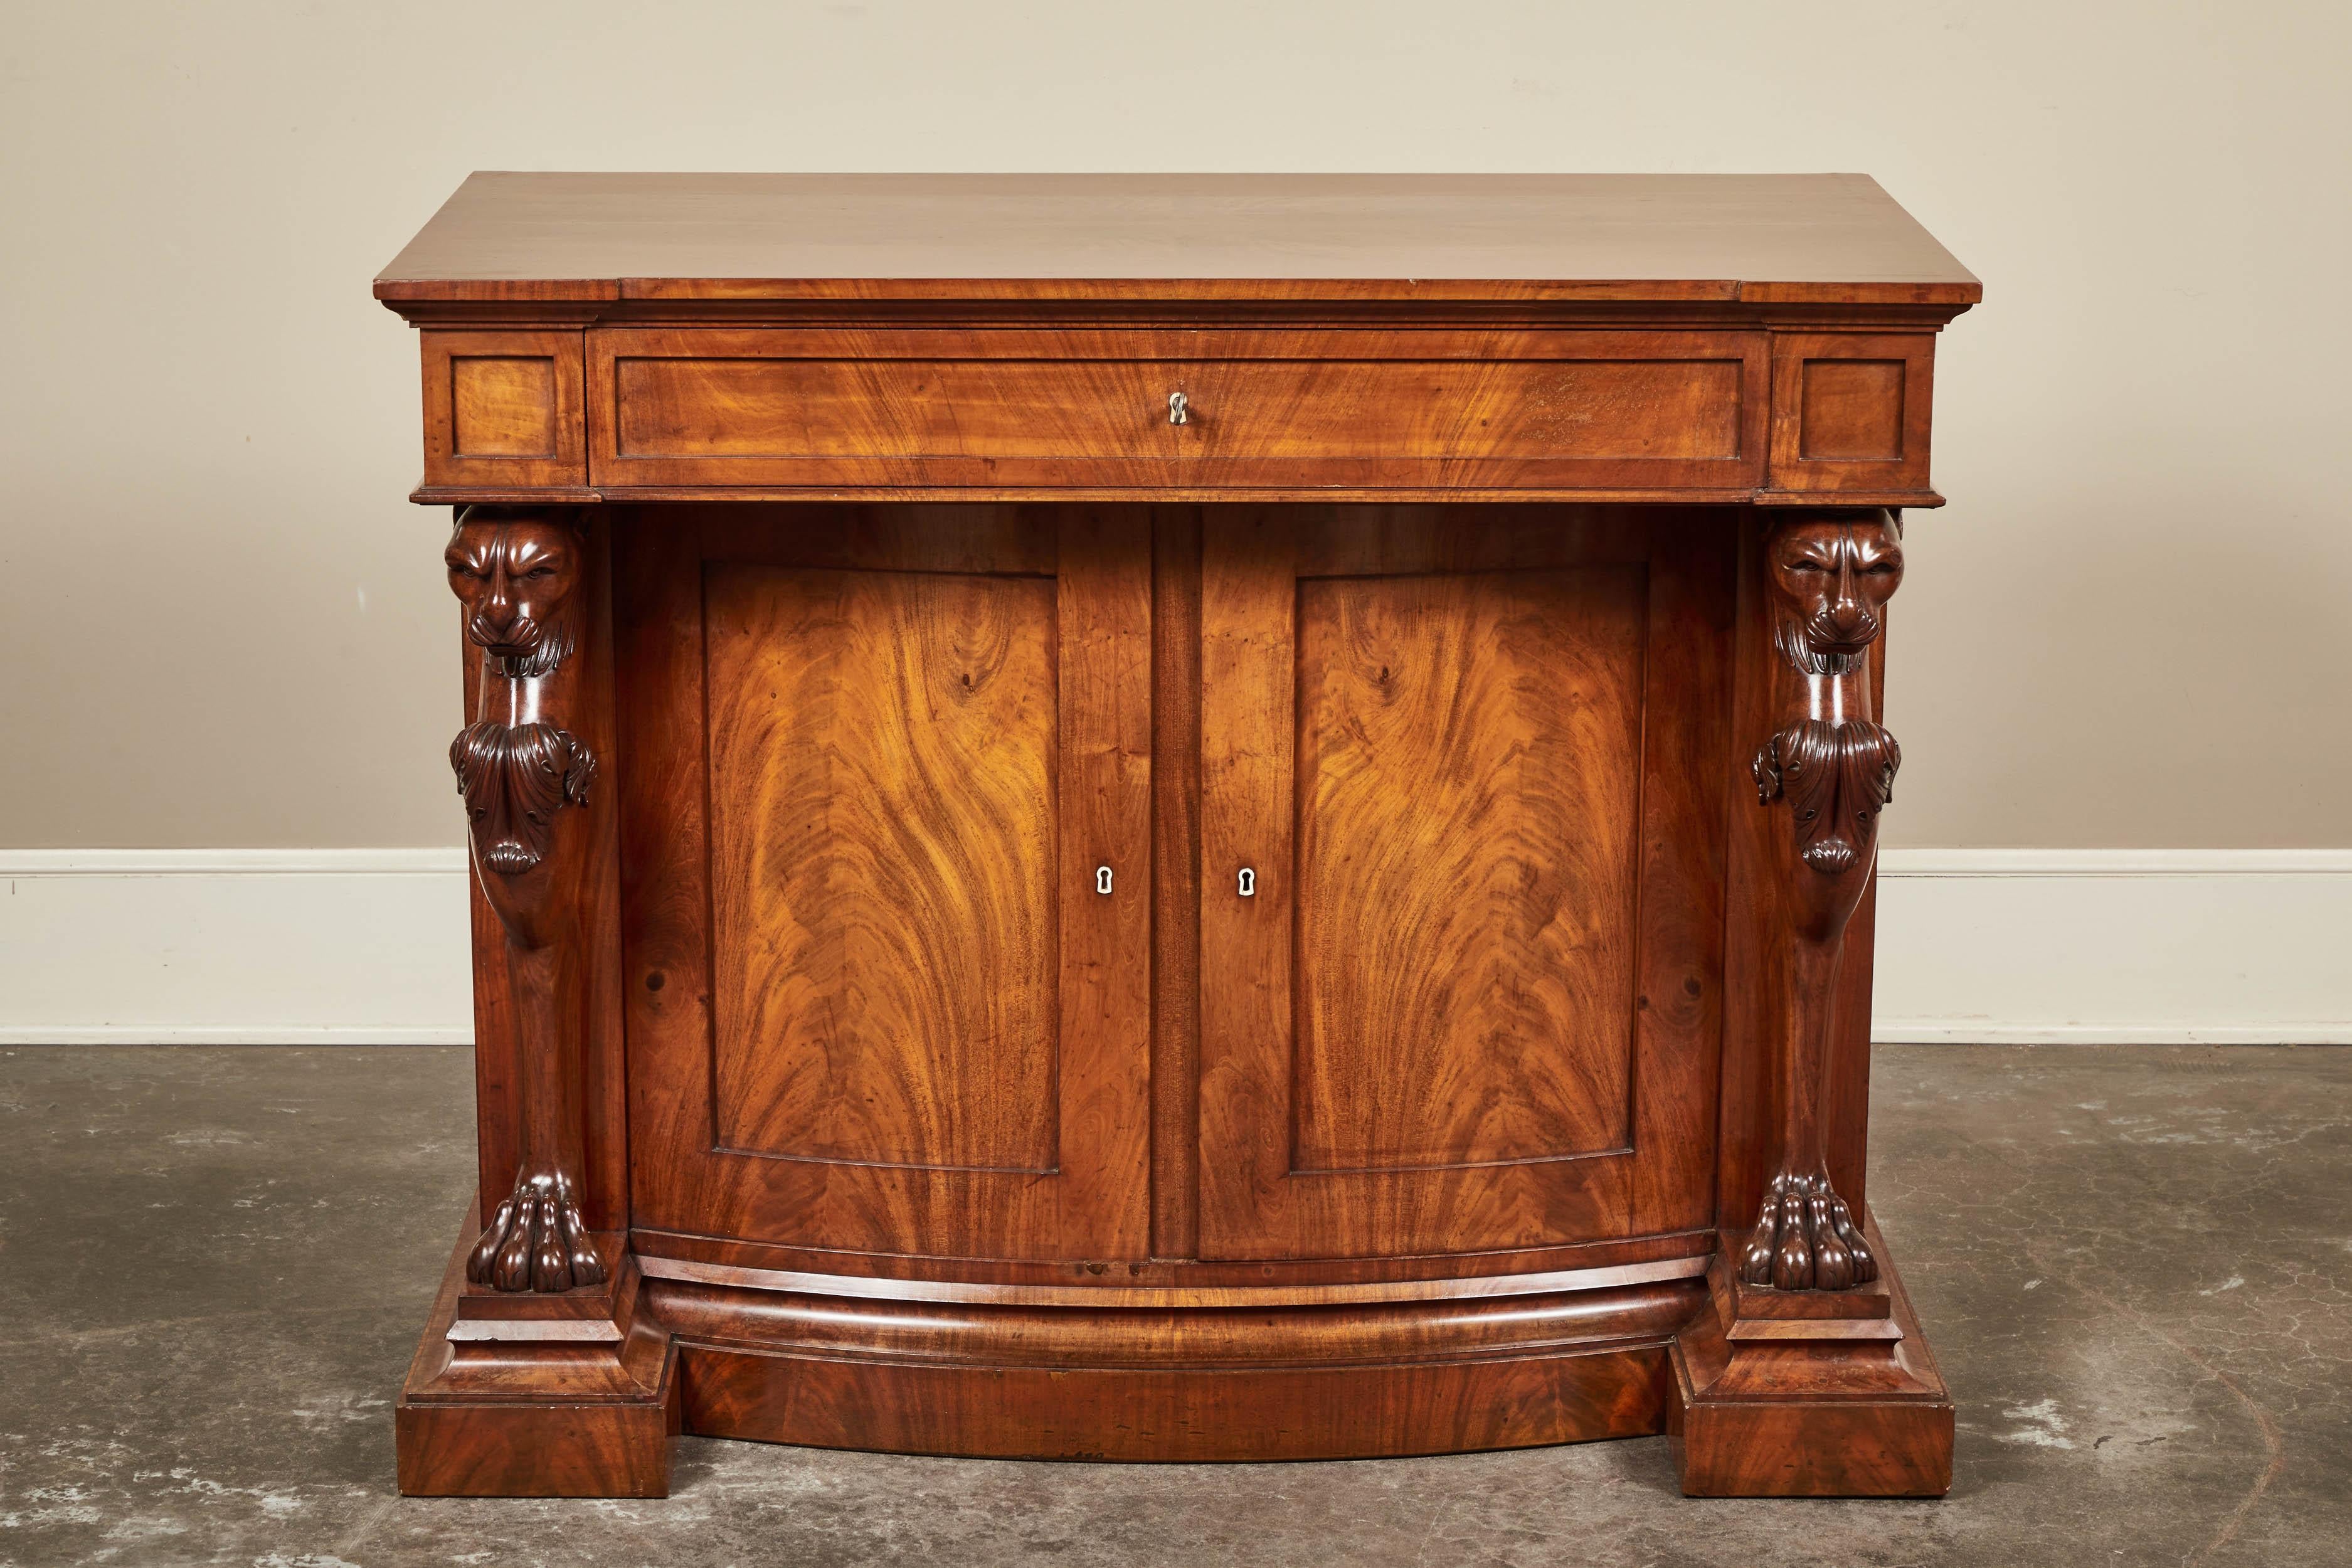 A William IV style mahogany secretary cabinet. Outset surface with a molded edge over a single drawer which opens to reveal a writing surface and three small drawers, set above a bowfront two door cabinet flanked by carved griffin monopedia